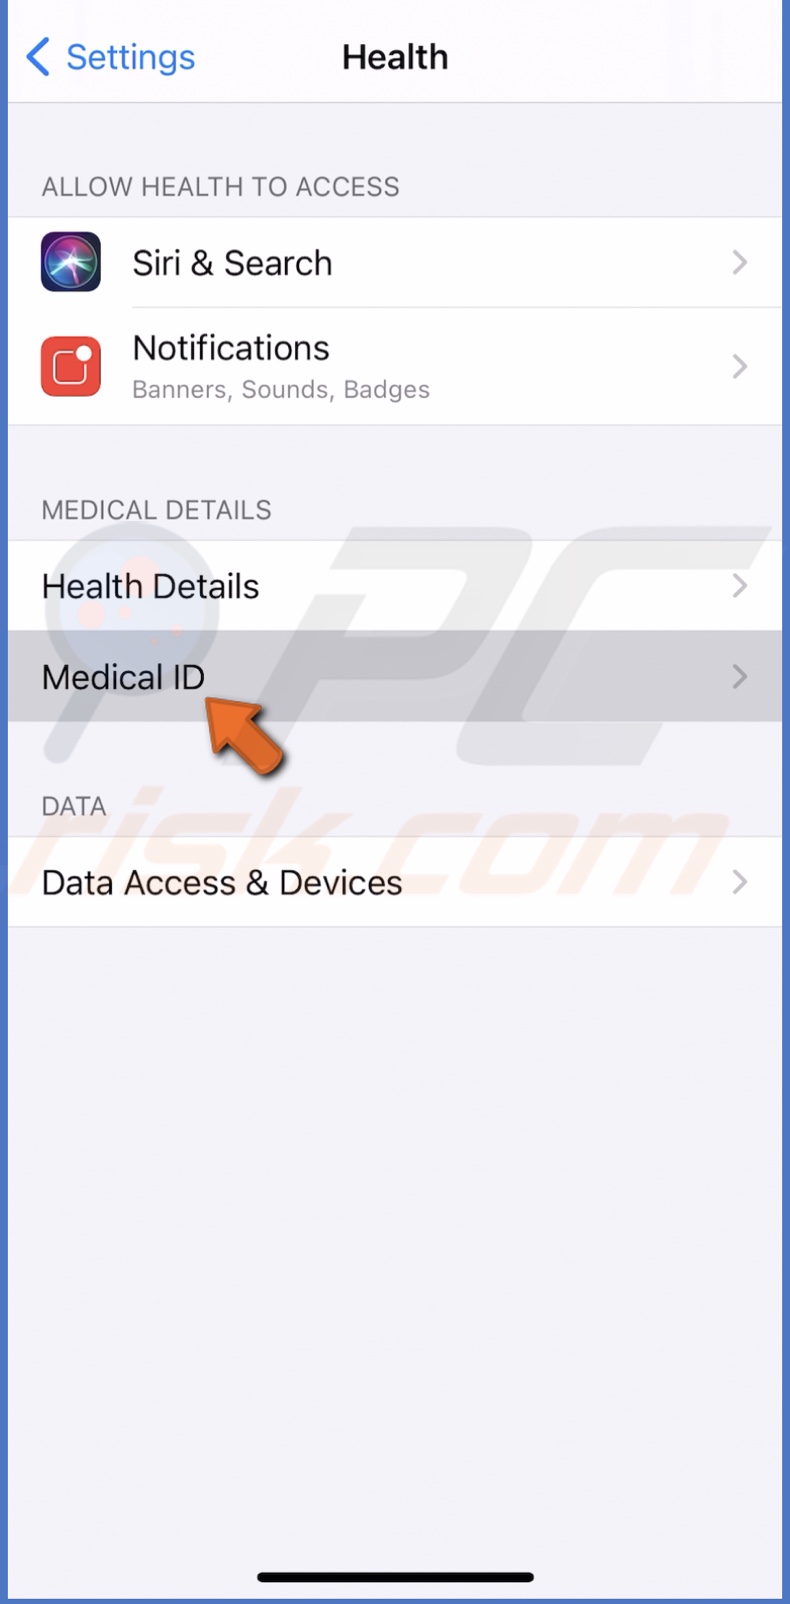 Tap on Medical ID